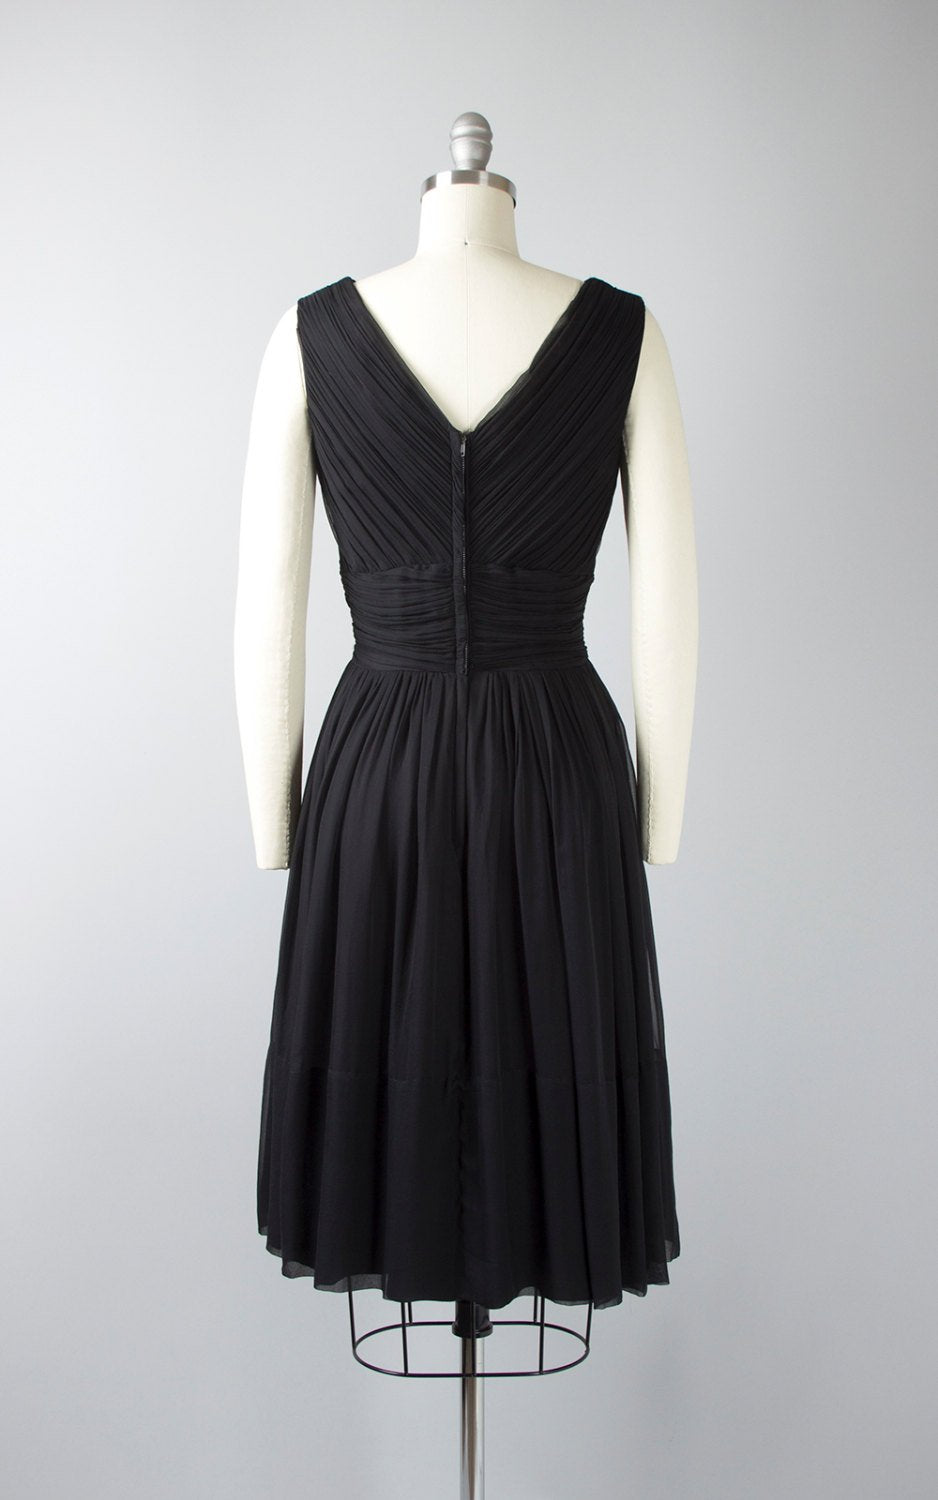 Vintage 50s Black Silk Chiffon Cocktail Dress | 1950s Ruched Gathered Full Skirt Party Dress (xs/small)